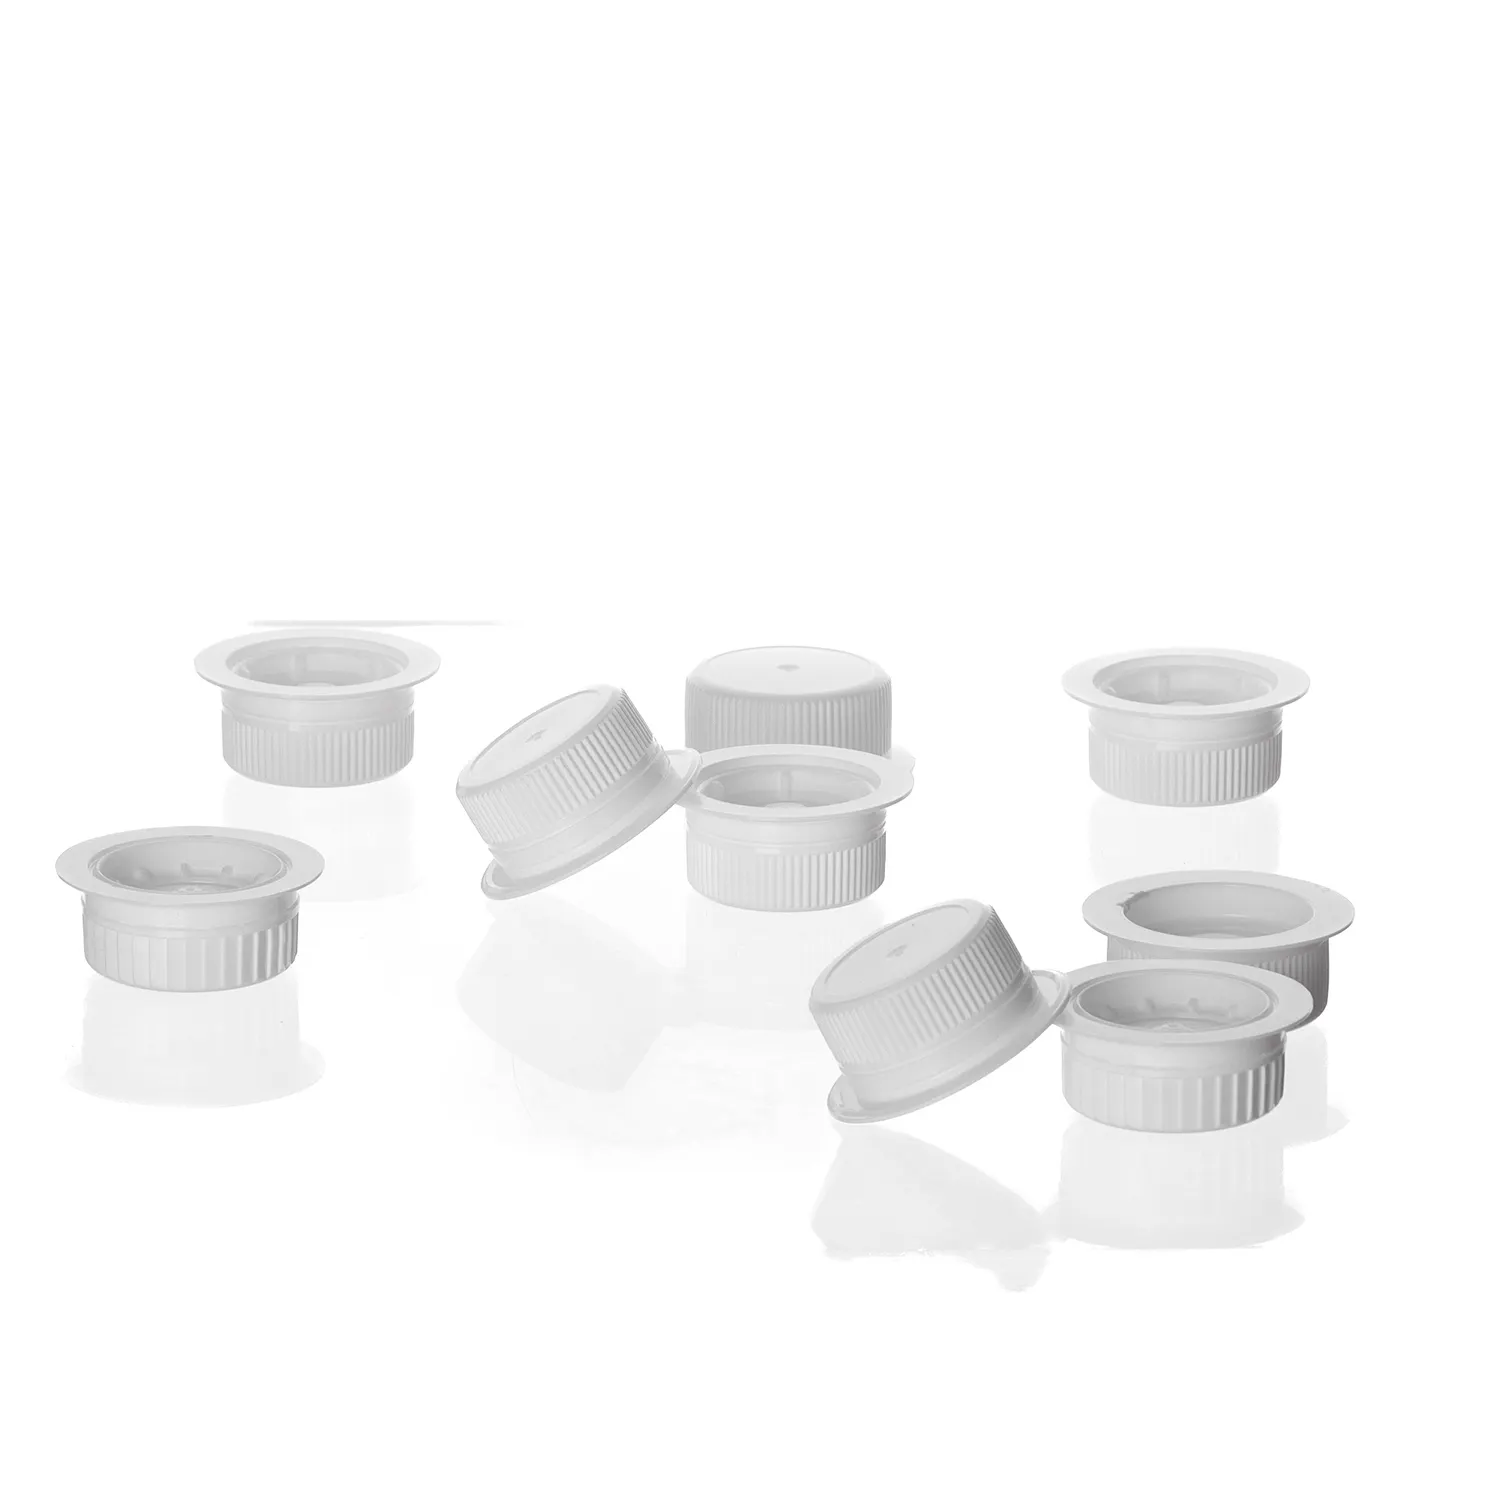 OEM Manufacturer 1L Caps For Pineapple juice Water Milk and Juice Drink Packaging